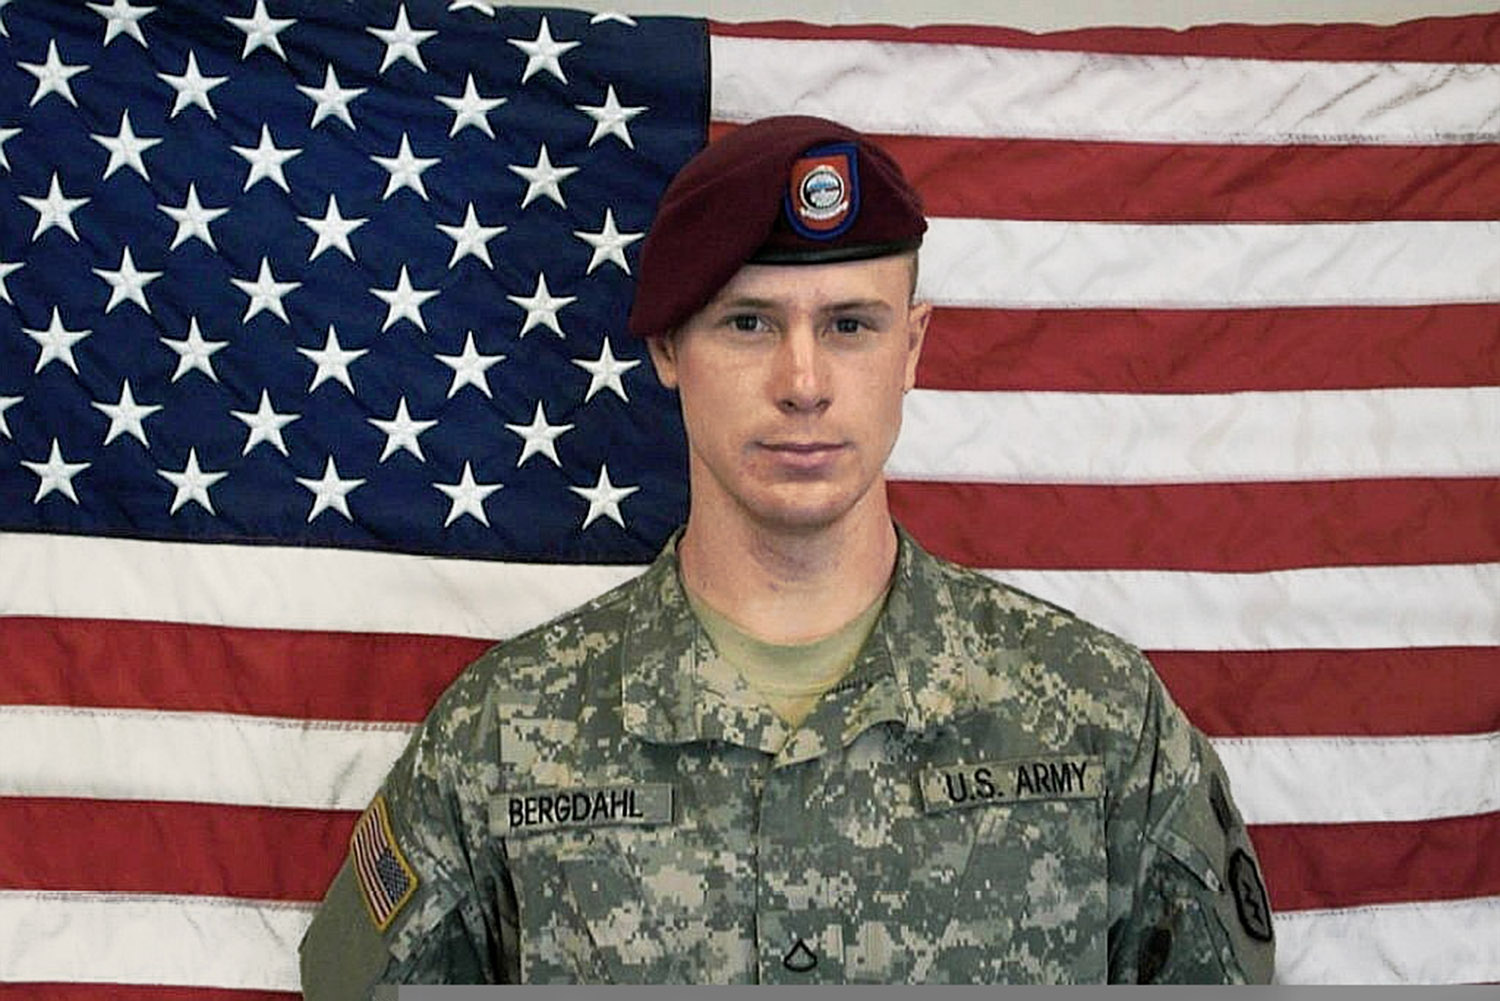 Sgt. Bowe Bergdahl in an  undated file image provided by the U.S. Army. (U.S. Army/Getty Images)